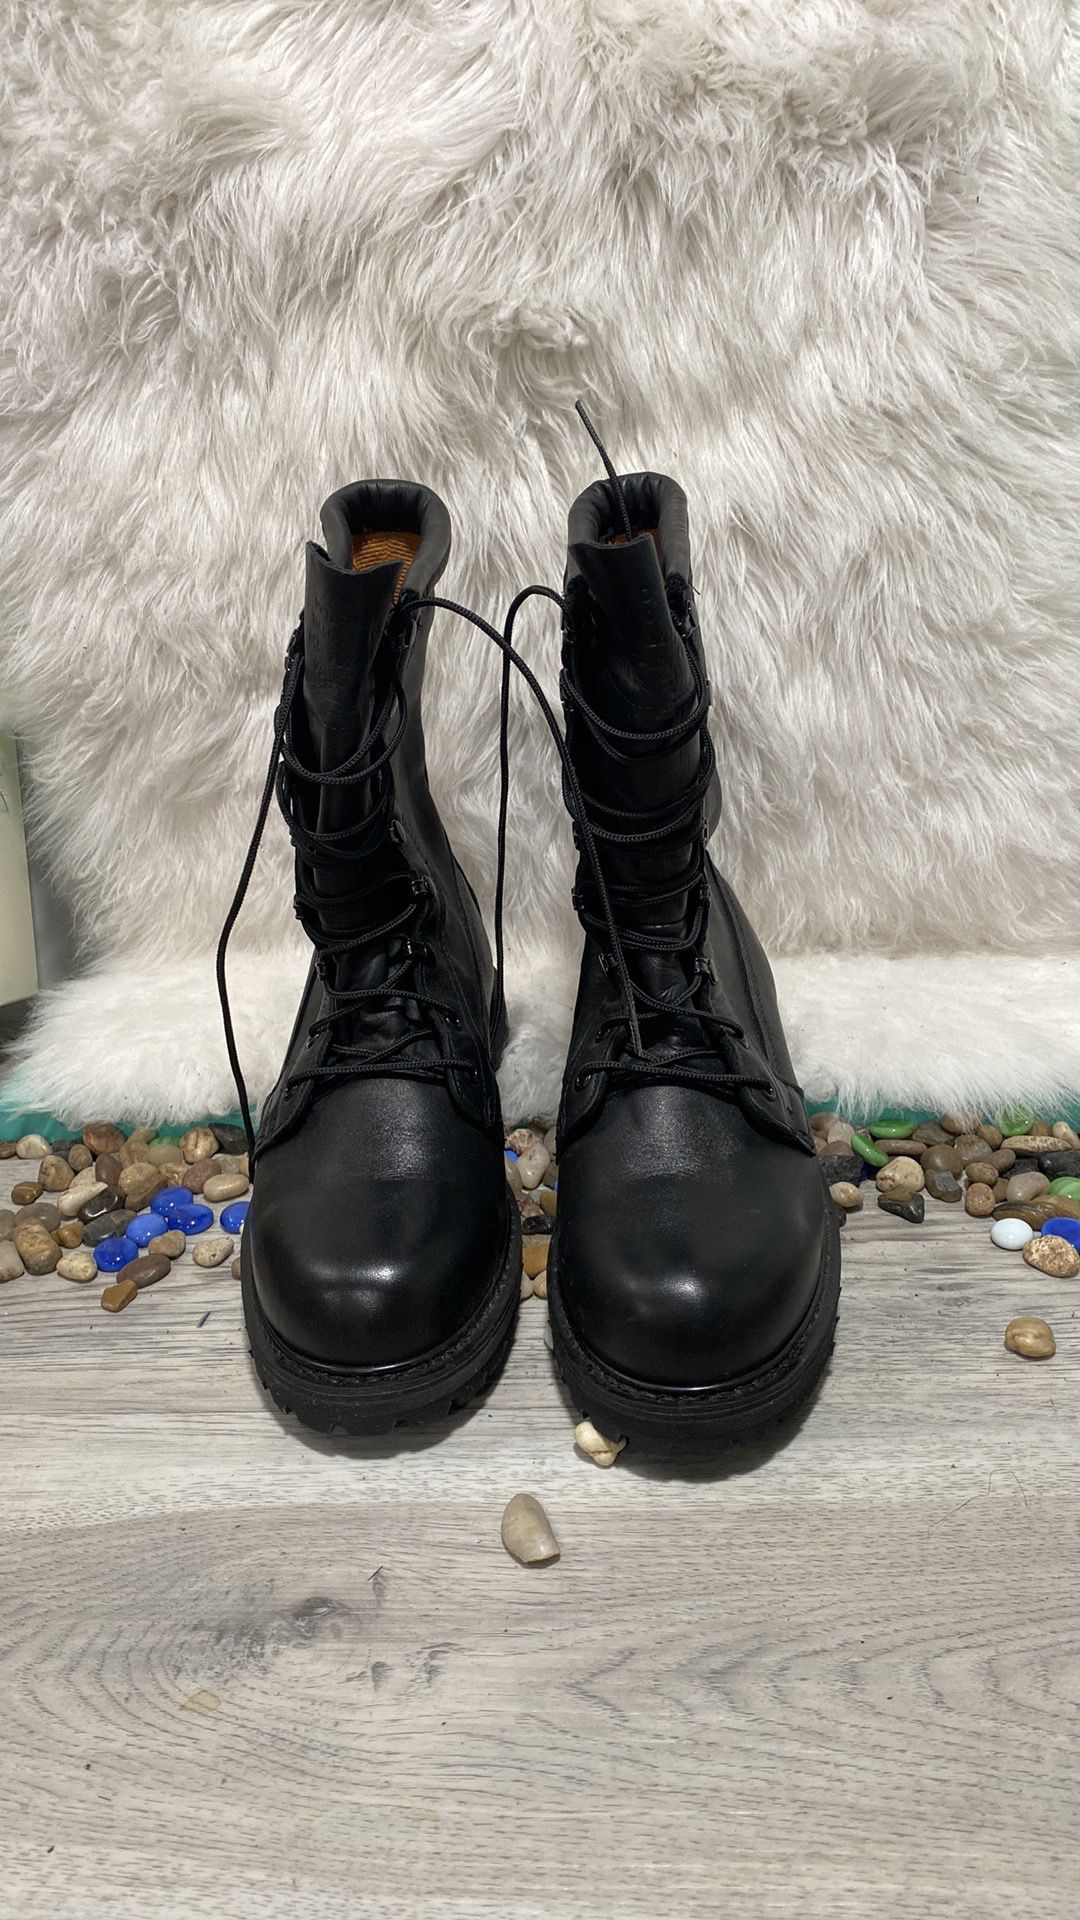 NWB BATES 11460 Military Army Combat Boots Black Leather Men's Size 8.5 R